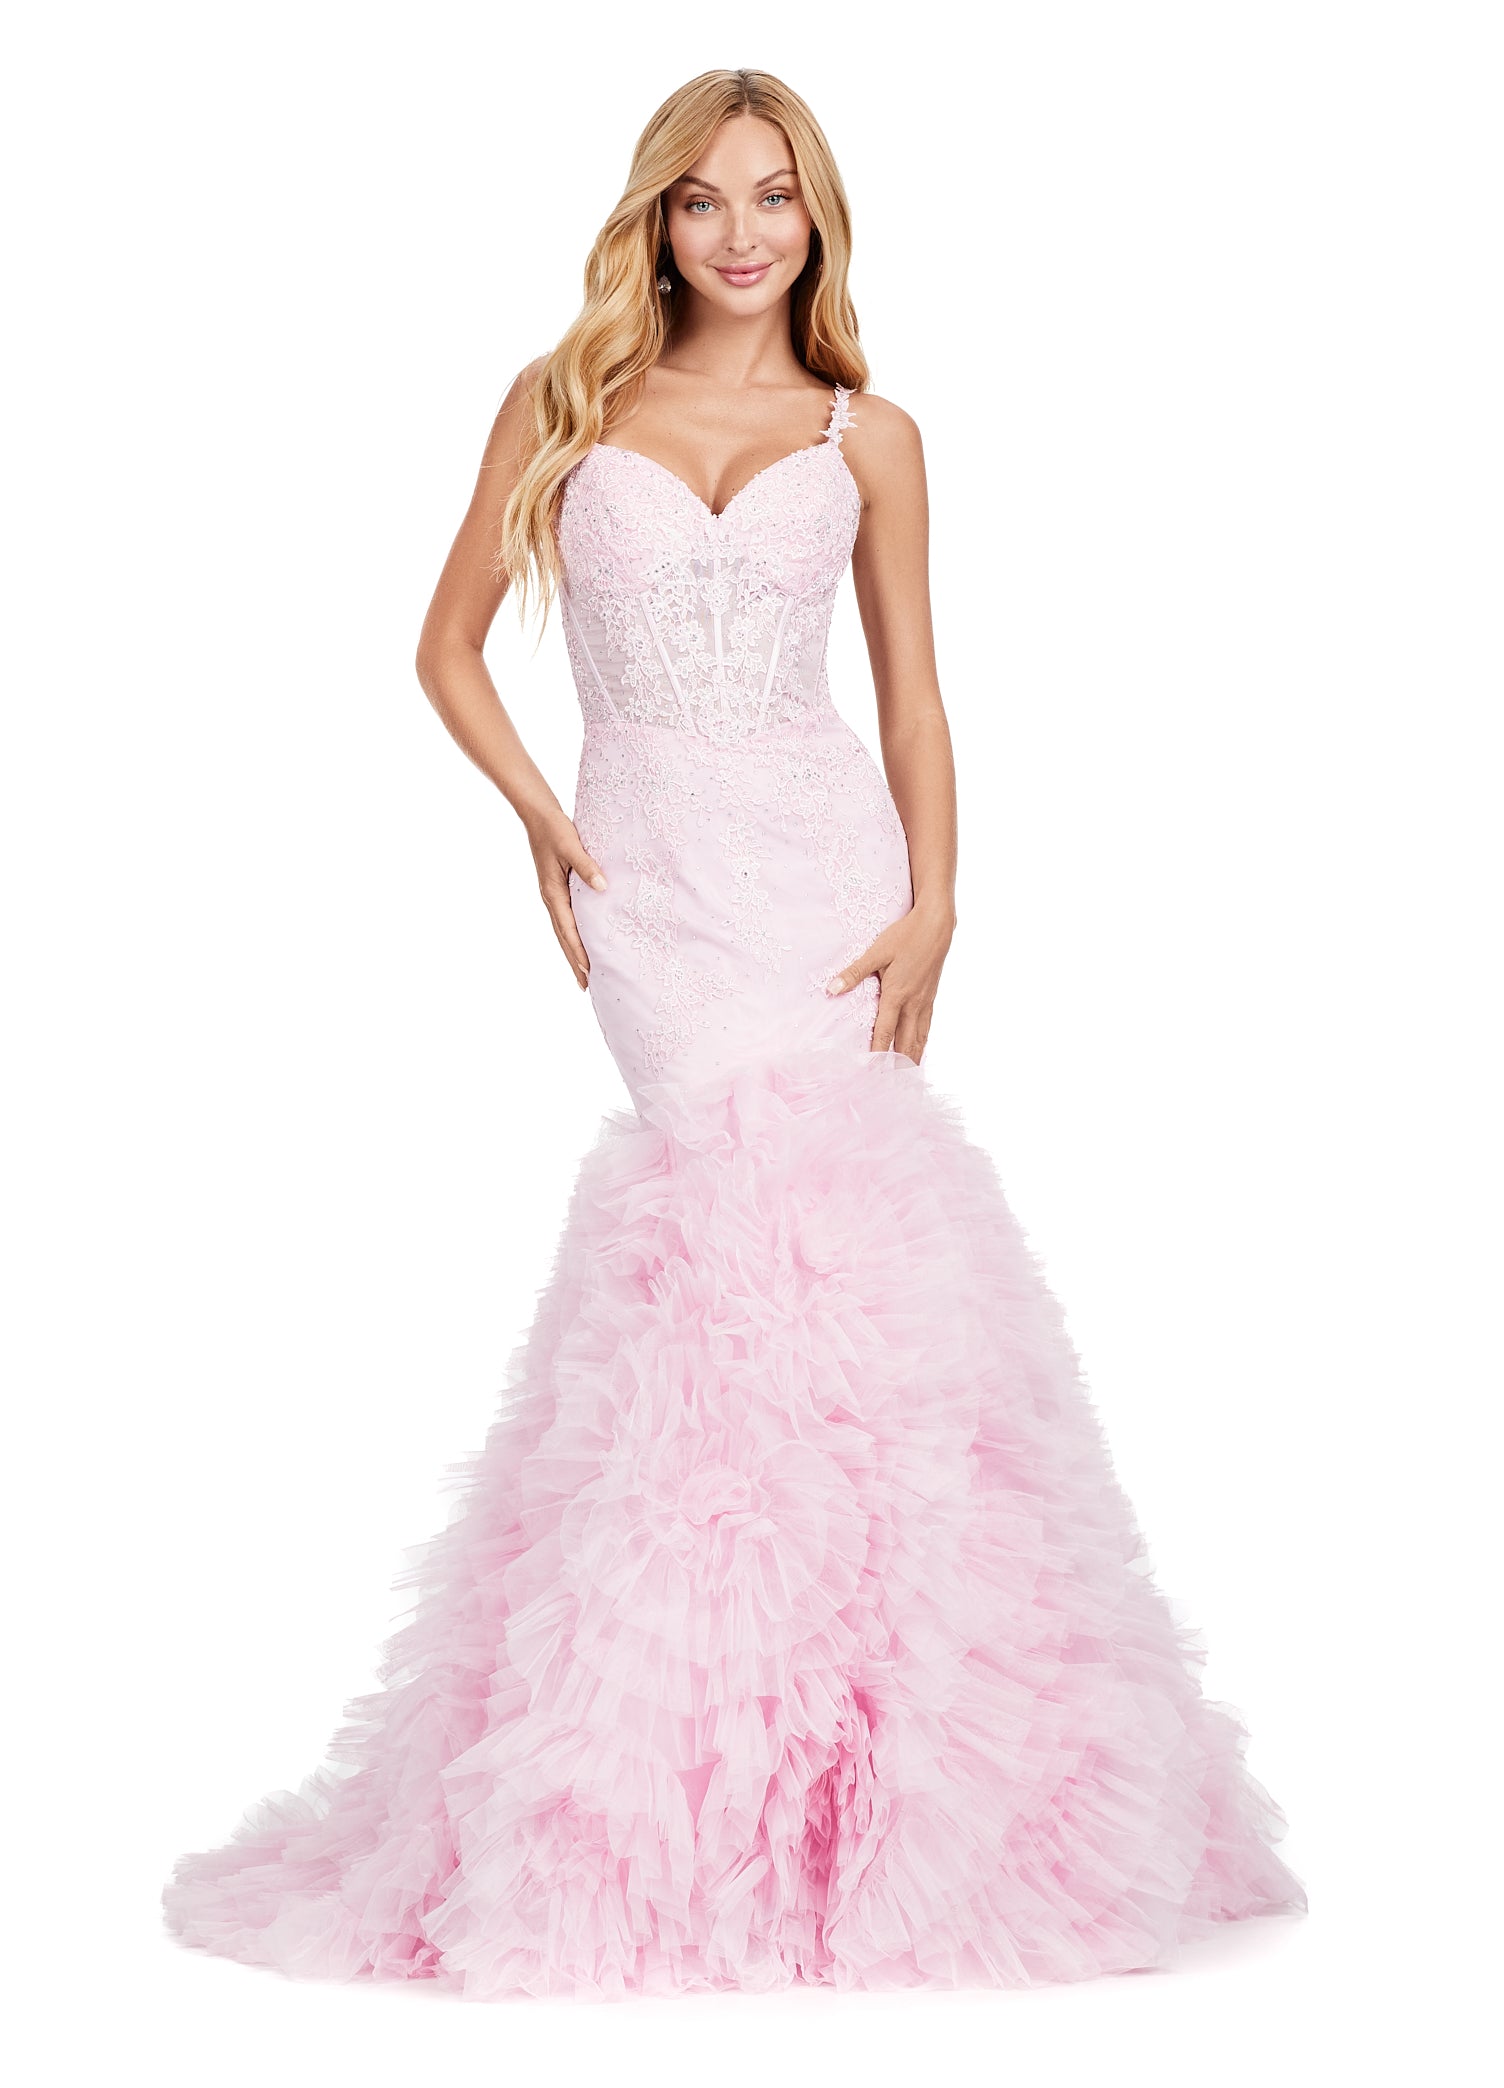 Expertly designed by Ashley Lauren, this long prom dress features a stunning mermaid silhouette with spaghetti straps and a corset bustier. The ruffled tulle skirt adds a touch of romance to this formal pageant gown. Be the center of attention at your special event. This mermaid gown is what dreams are made of! With its lace details, exposed corset bustier and full ruffled tulle skirt, this dress is sure to impress!